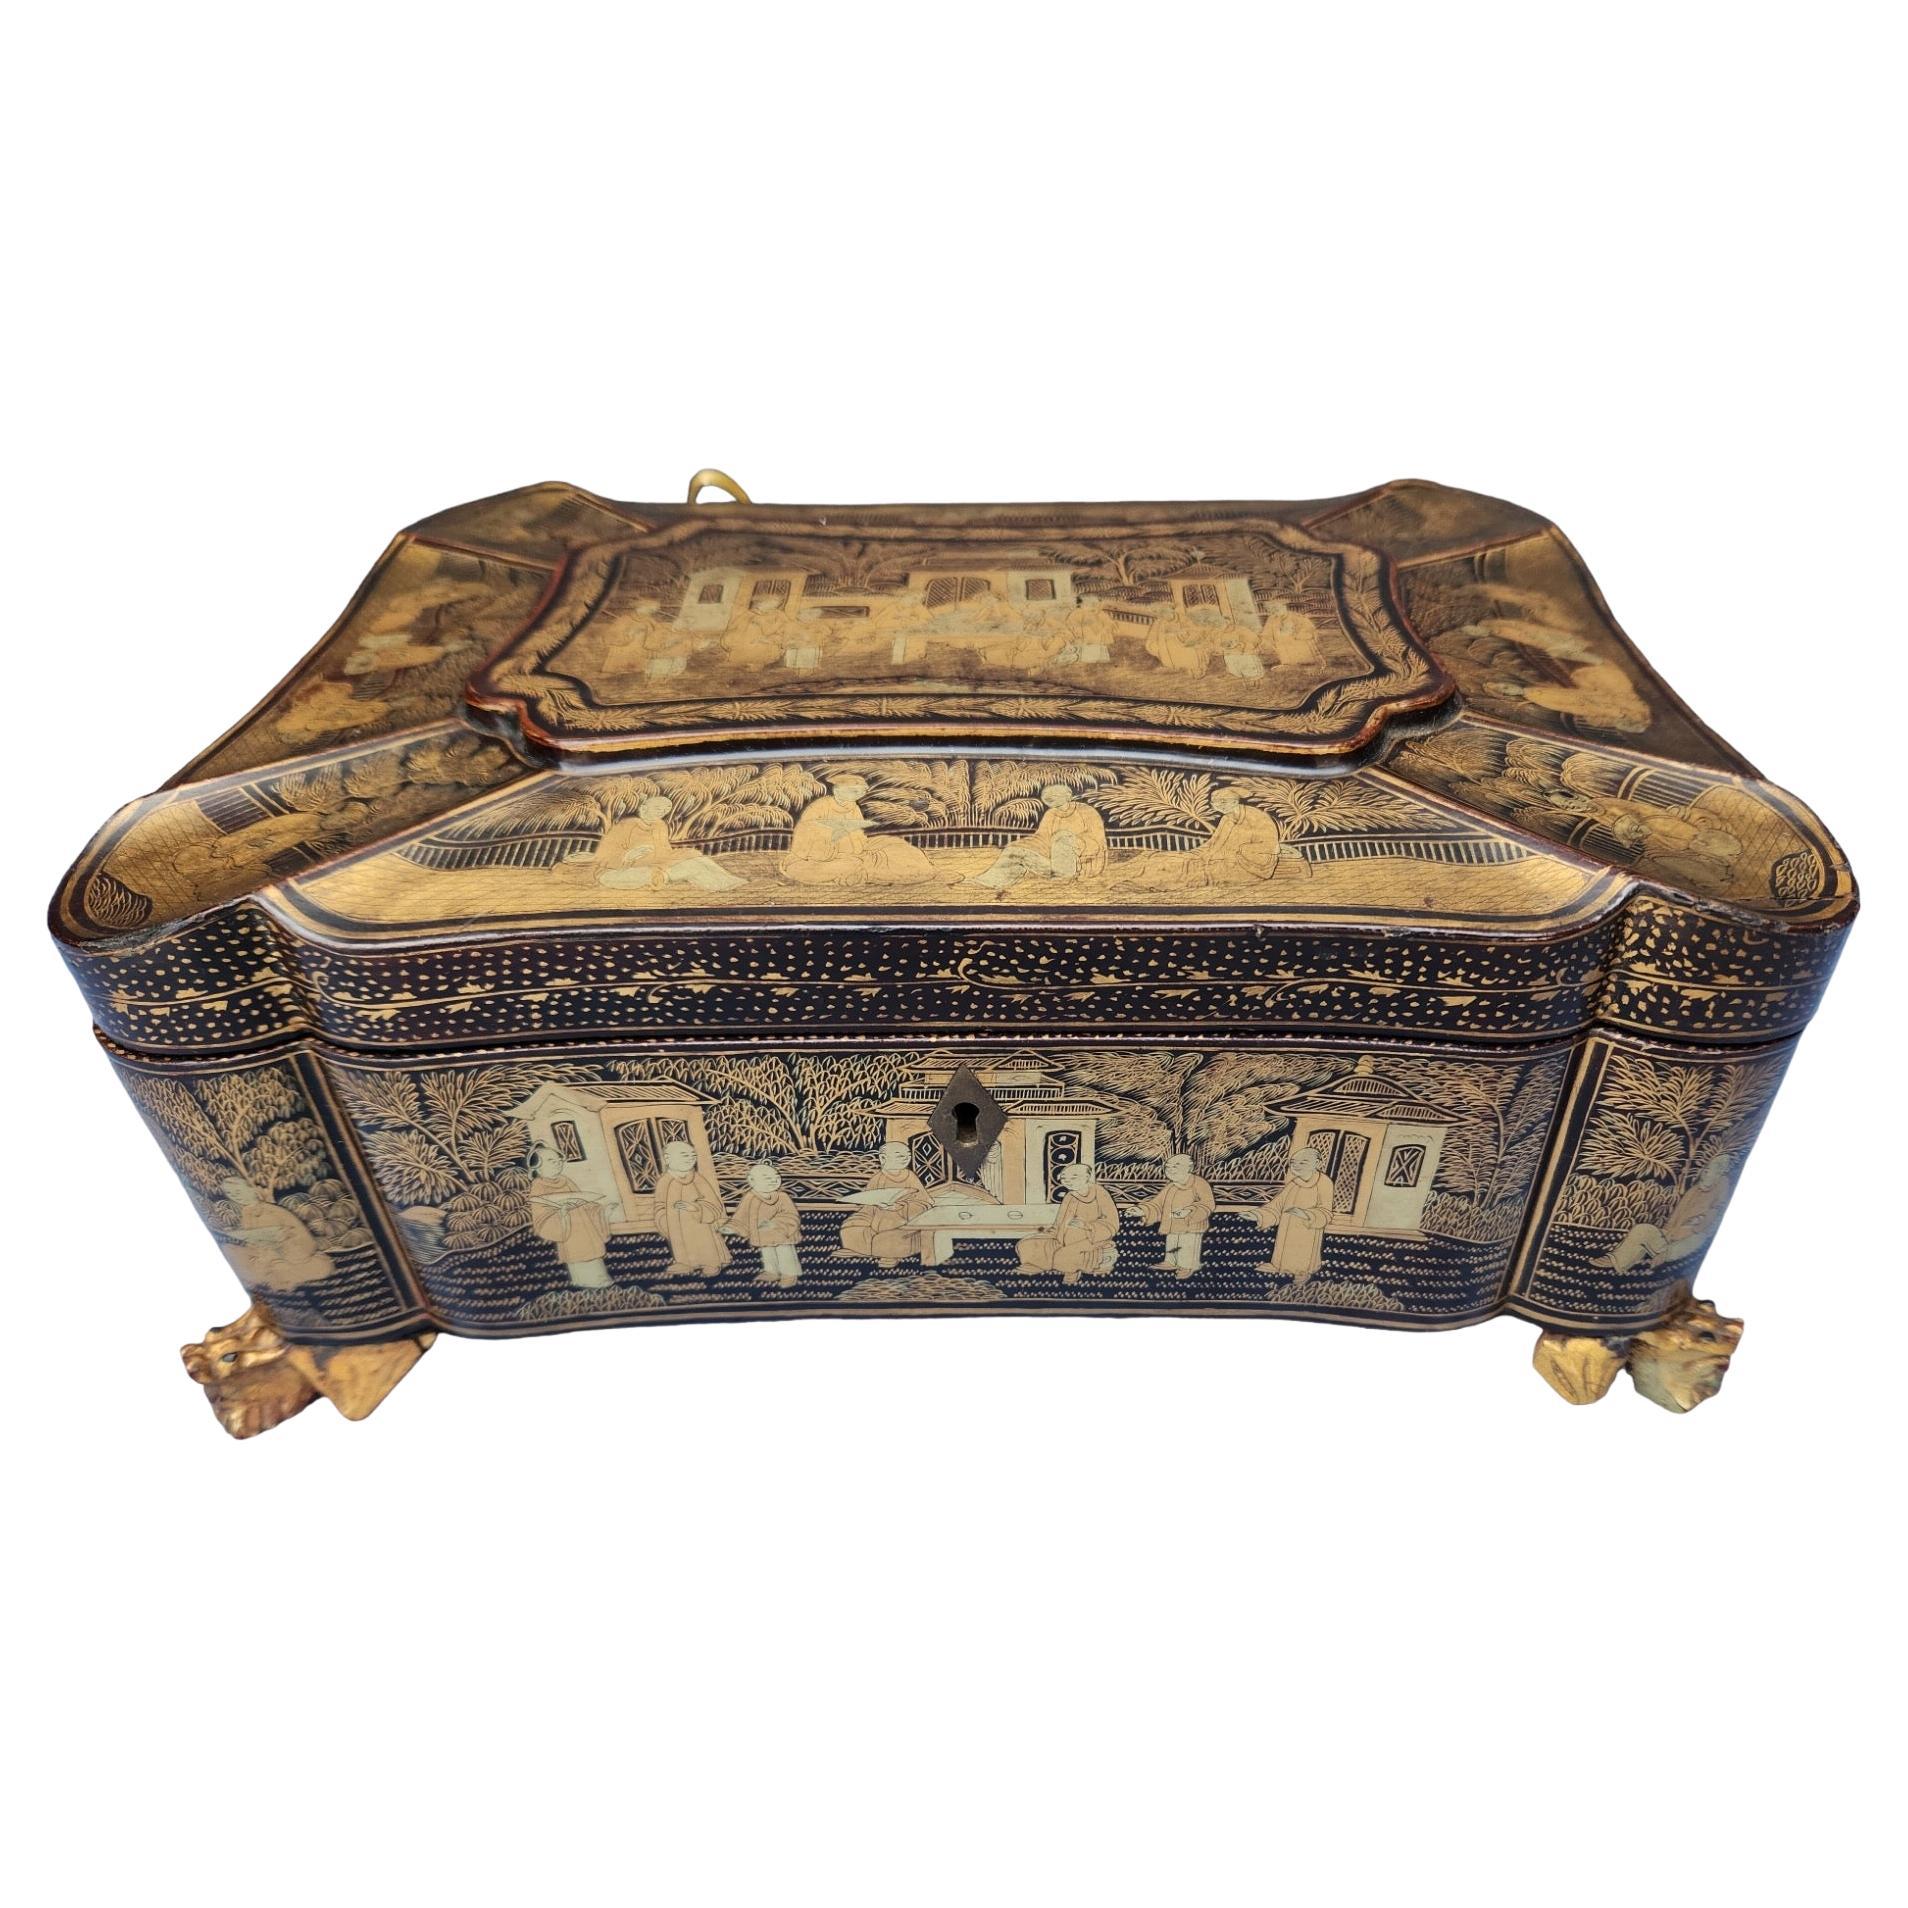 Delightful Child's 'Mercerie' sewing box, French, 19th century